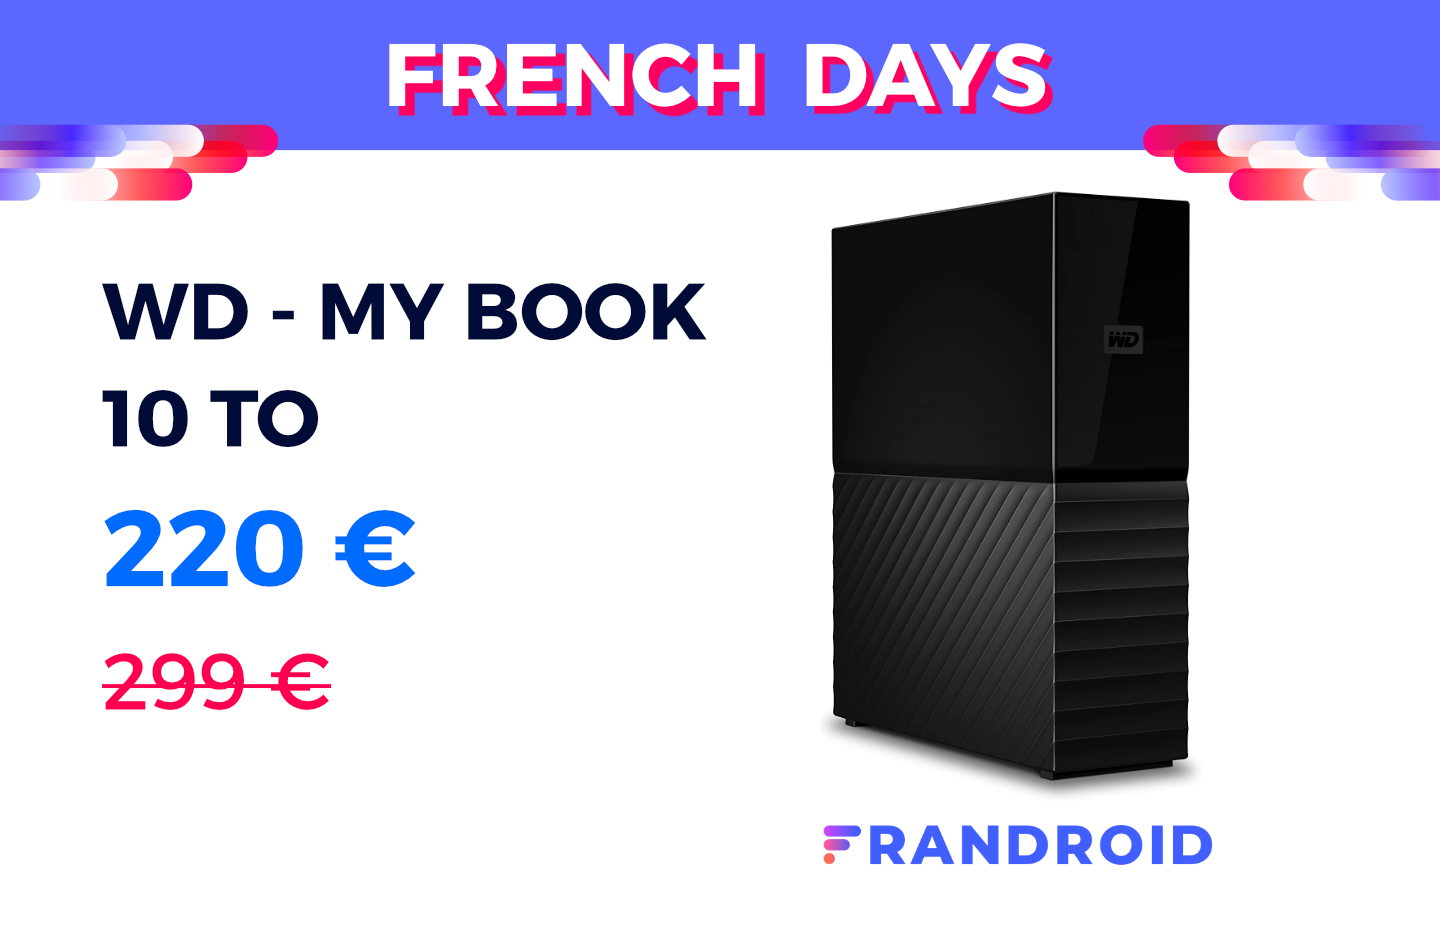 https://images.frandroid.com/wp-content/uploads/2020/09/wg-my-book-10-to-french-days-2020-new-price.jpg